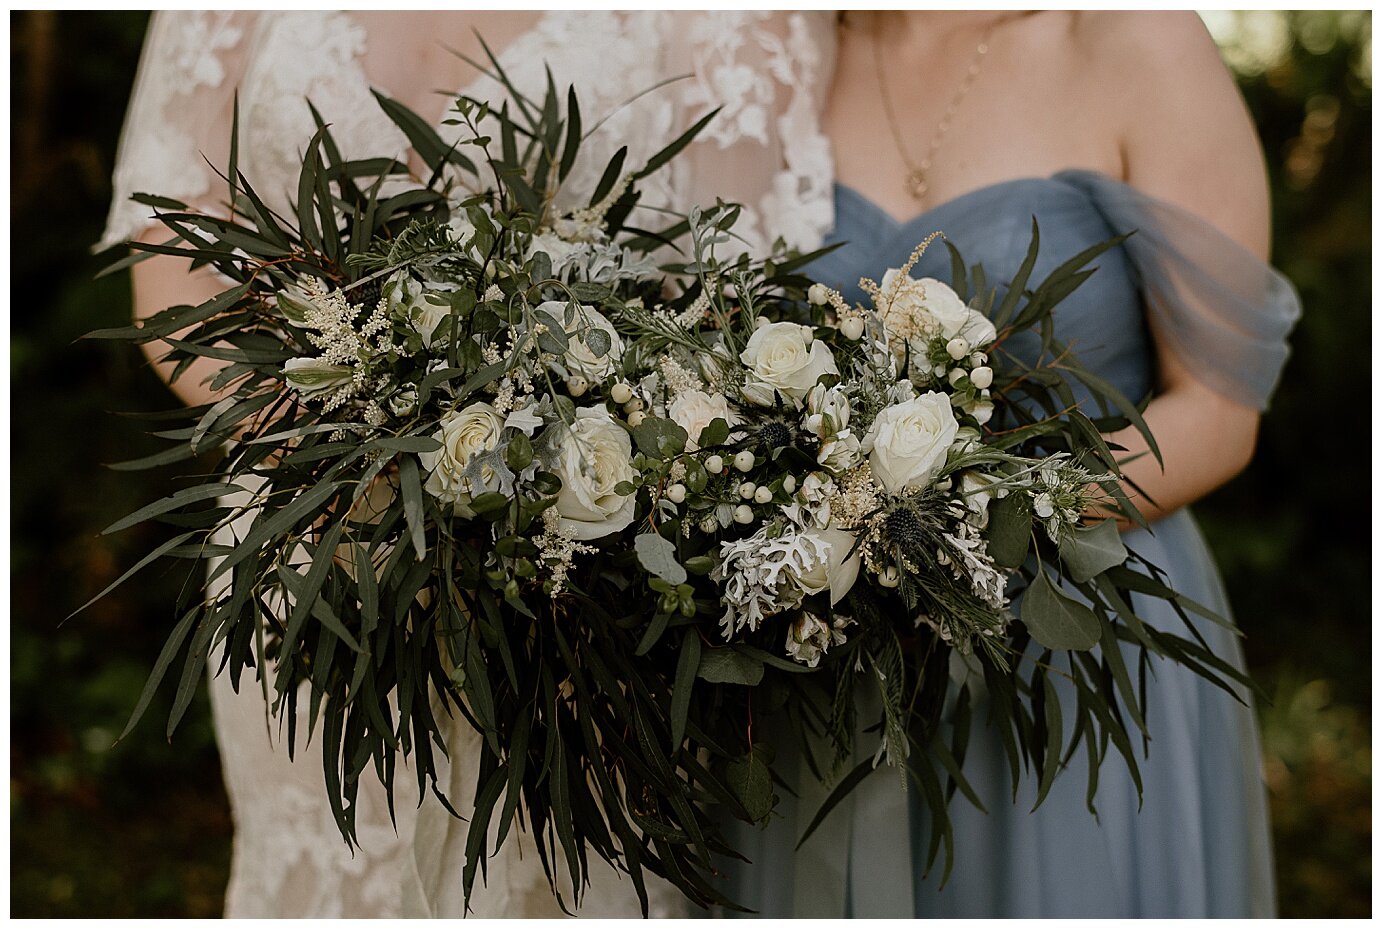 bride with bridesmaids wearing dusty blue long dresses and holding greenery bouquets